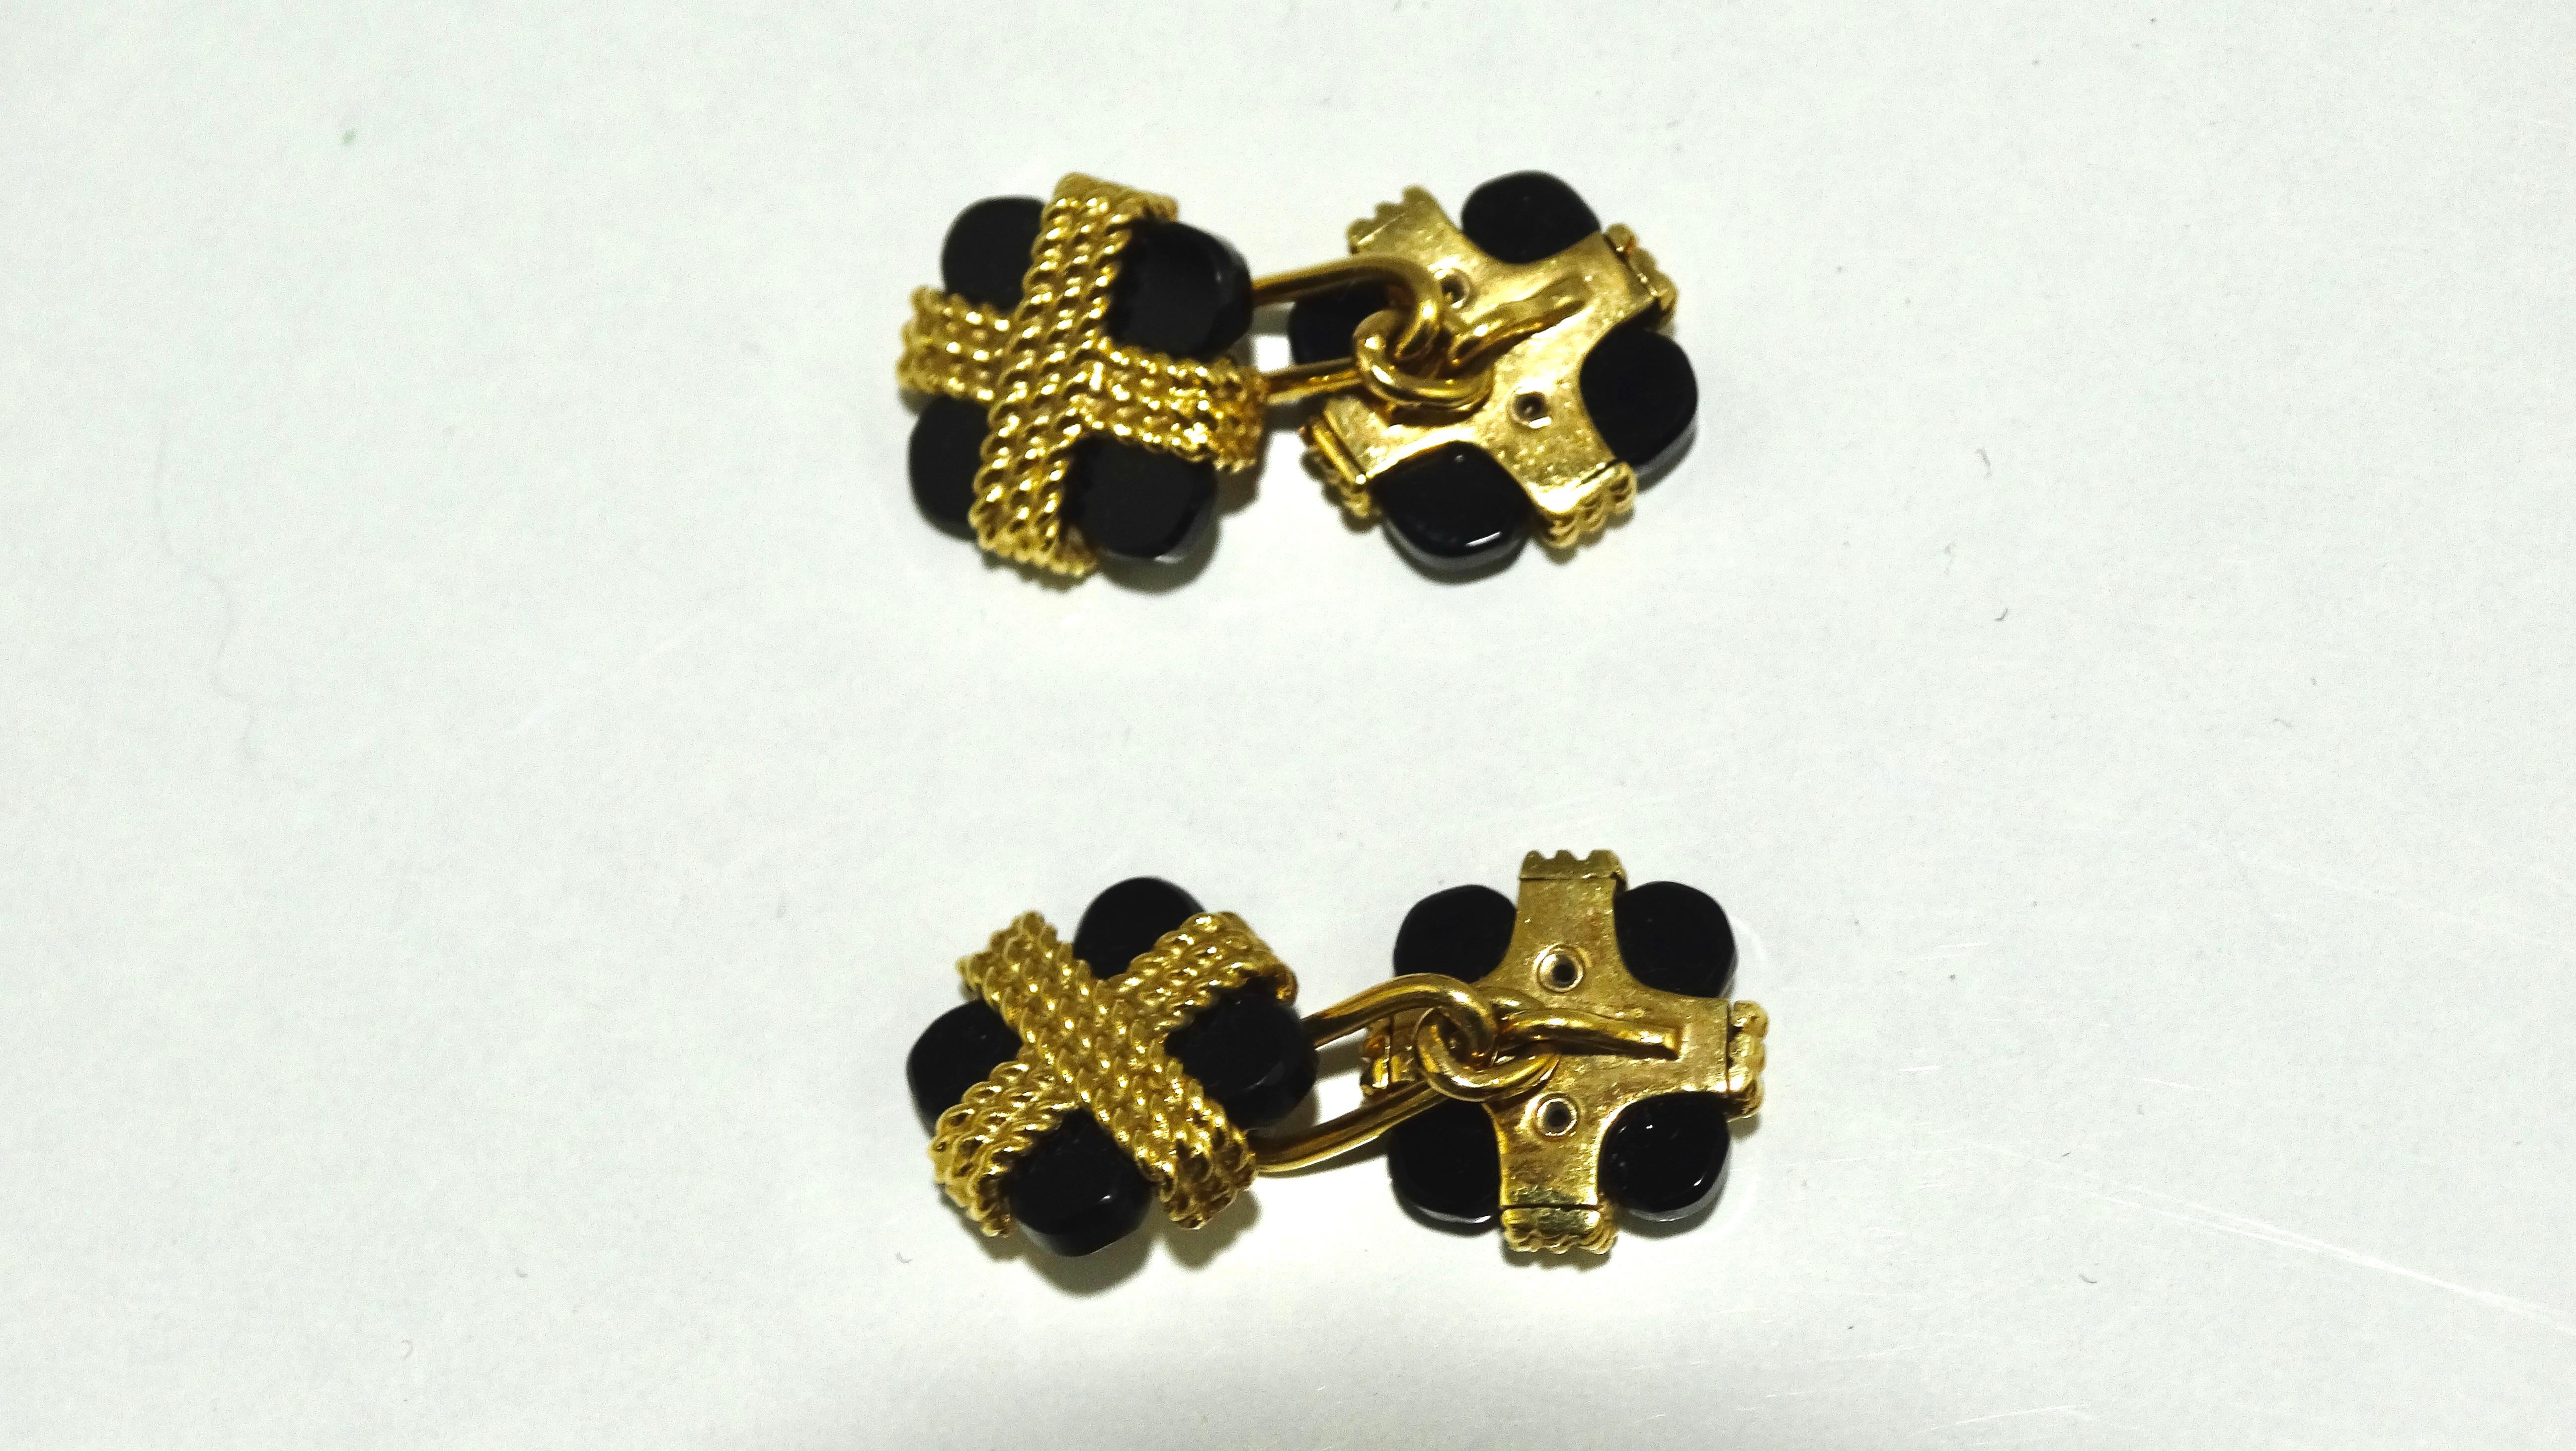 This is a wonderful pair of cufflinks from the luxury jewelry designer Van Cleef & Arpels cira 1970s. The cufflinks features a square onyx wrapped in an 18k gold rope style design. These versatile cufflinks would look sharp paired with your Rolex or